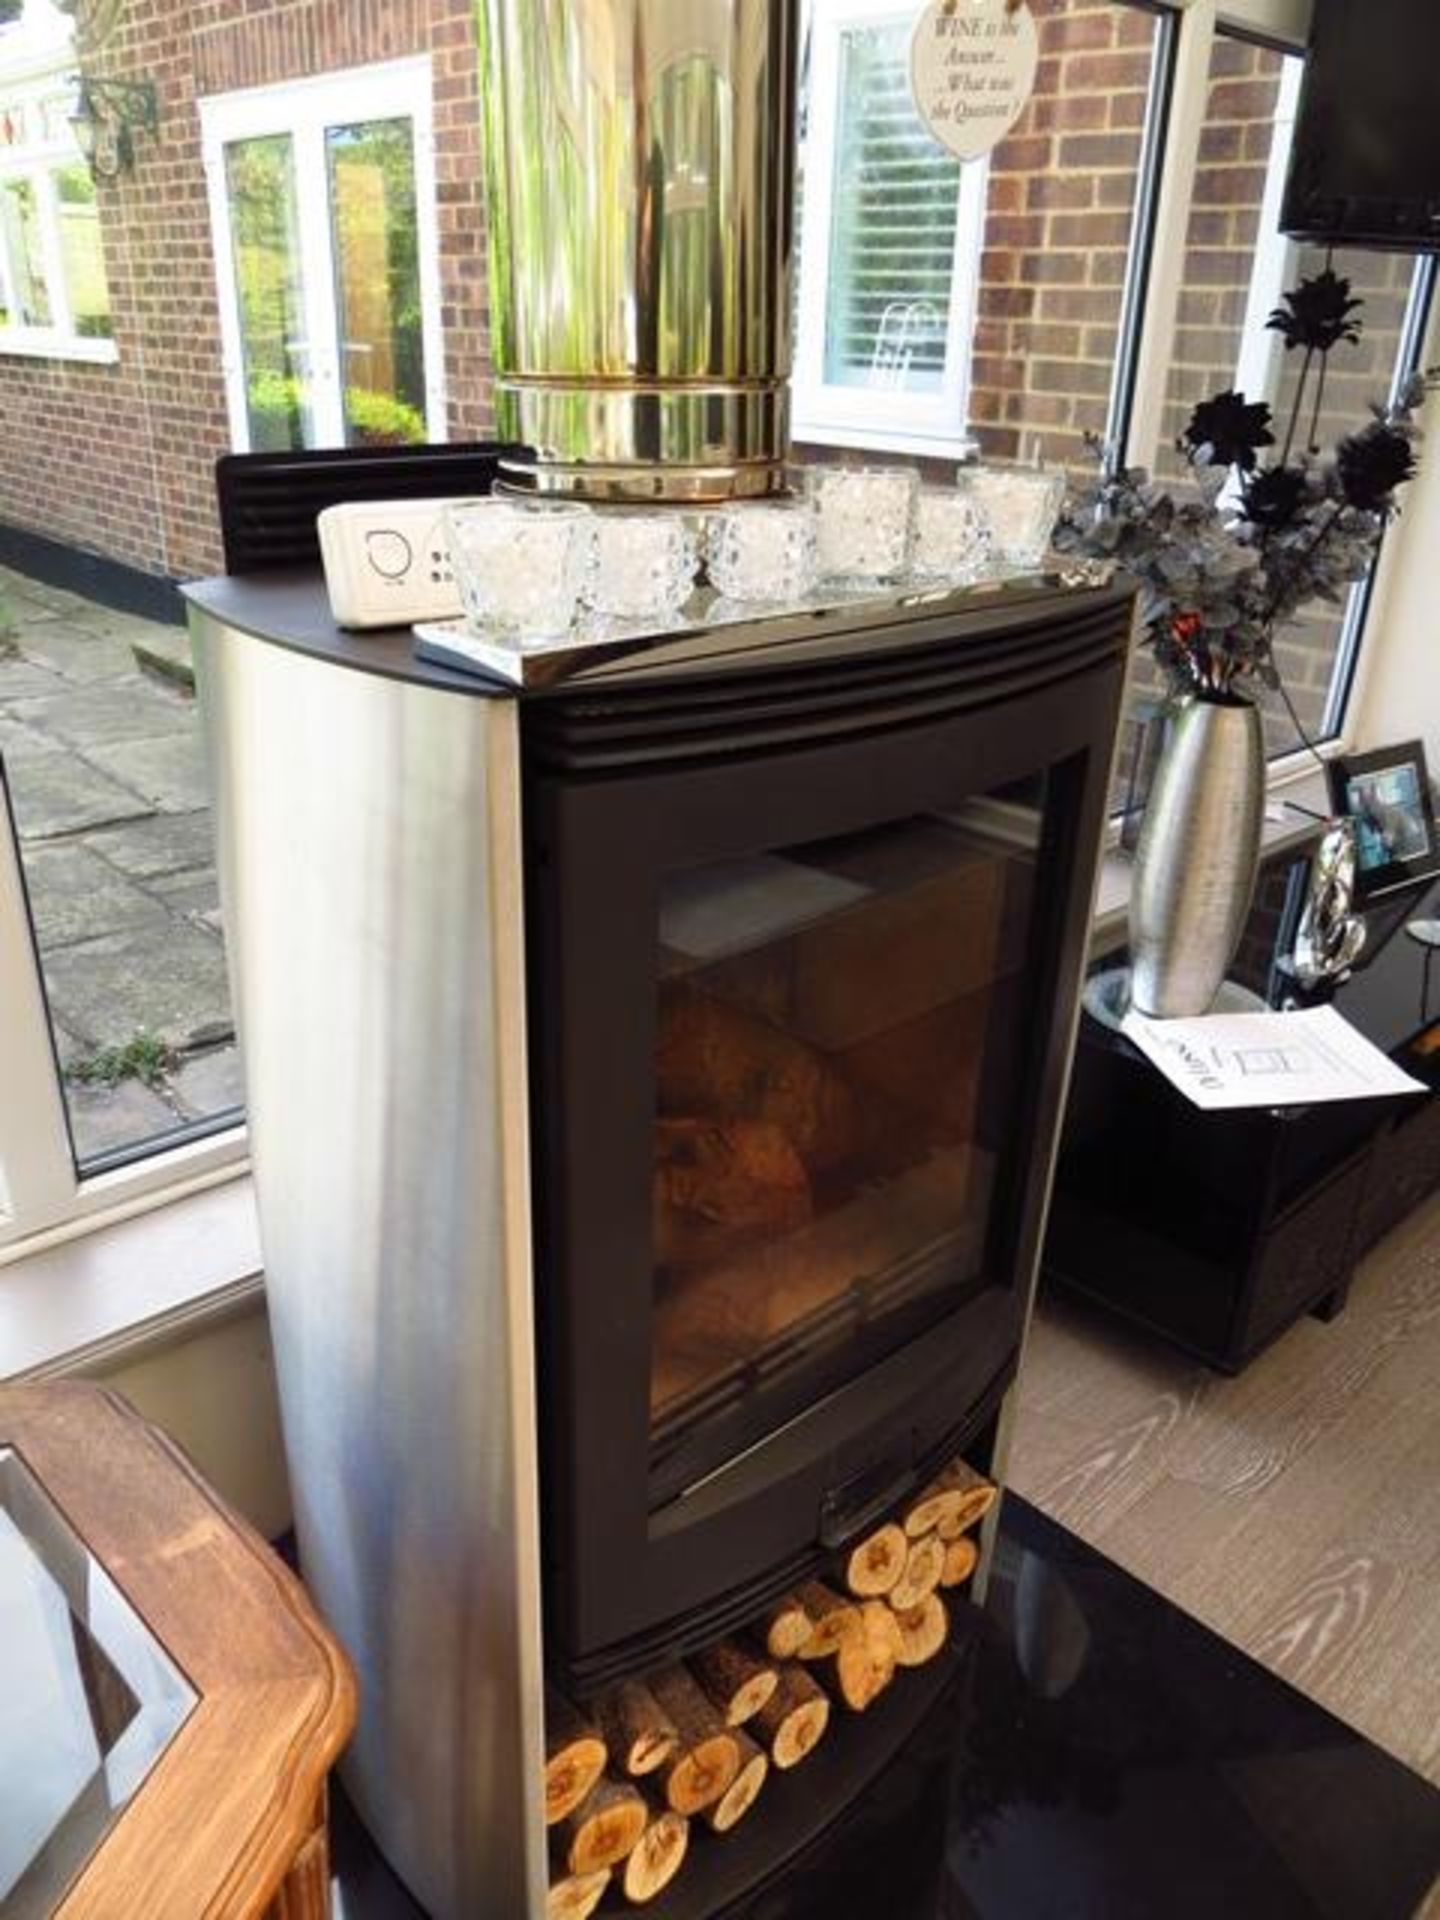 Dilusso R5 Euro BSEN 13240 Wood Burning Stove Efficiency 79% Nominal Heat Output 4.9Kw Mean CO - Image 4 of 5